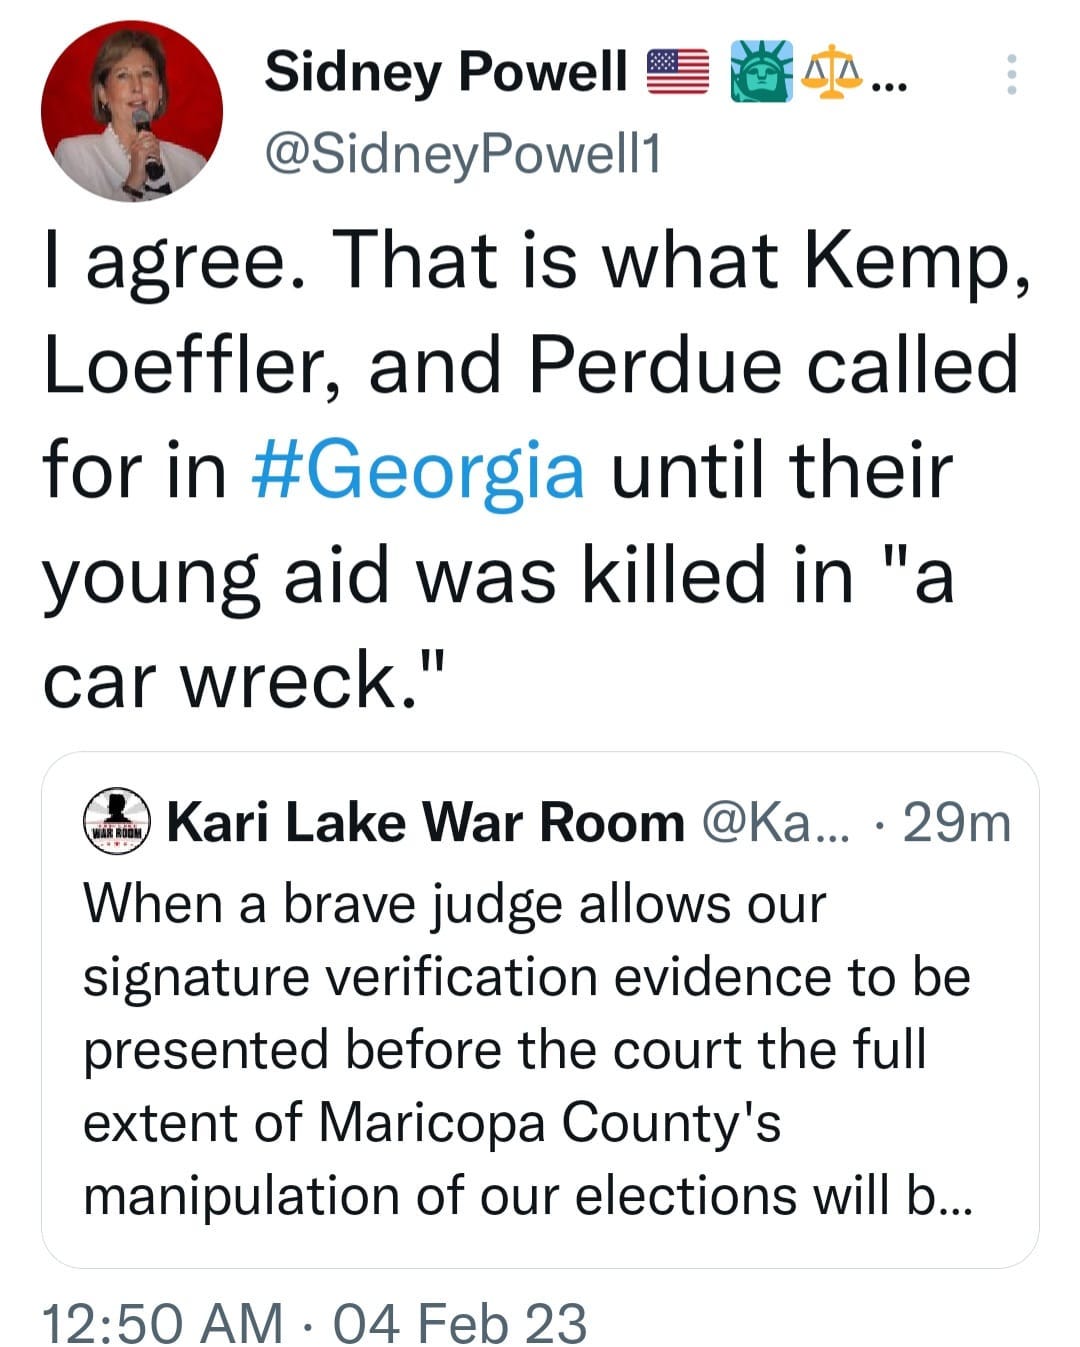 May be a Twitter screenshot of 1 person and text that says 'Sidney Powell @SidneyPowell1 I agree. That is what Kemp, Loeffler, and Perdue called for in #Georgia until their young aid was killed in "a car wreck." Wher 29m Kari Lake War Room @Ka... a brave judge allows our signature verification evidence to be presented before the court the full extent of Maricopa County's manipulation of our elections will b... 12:50 AM. 04 Feb 23'